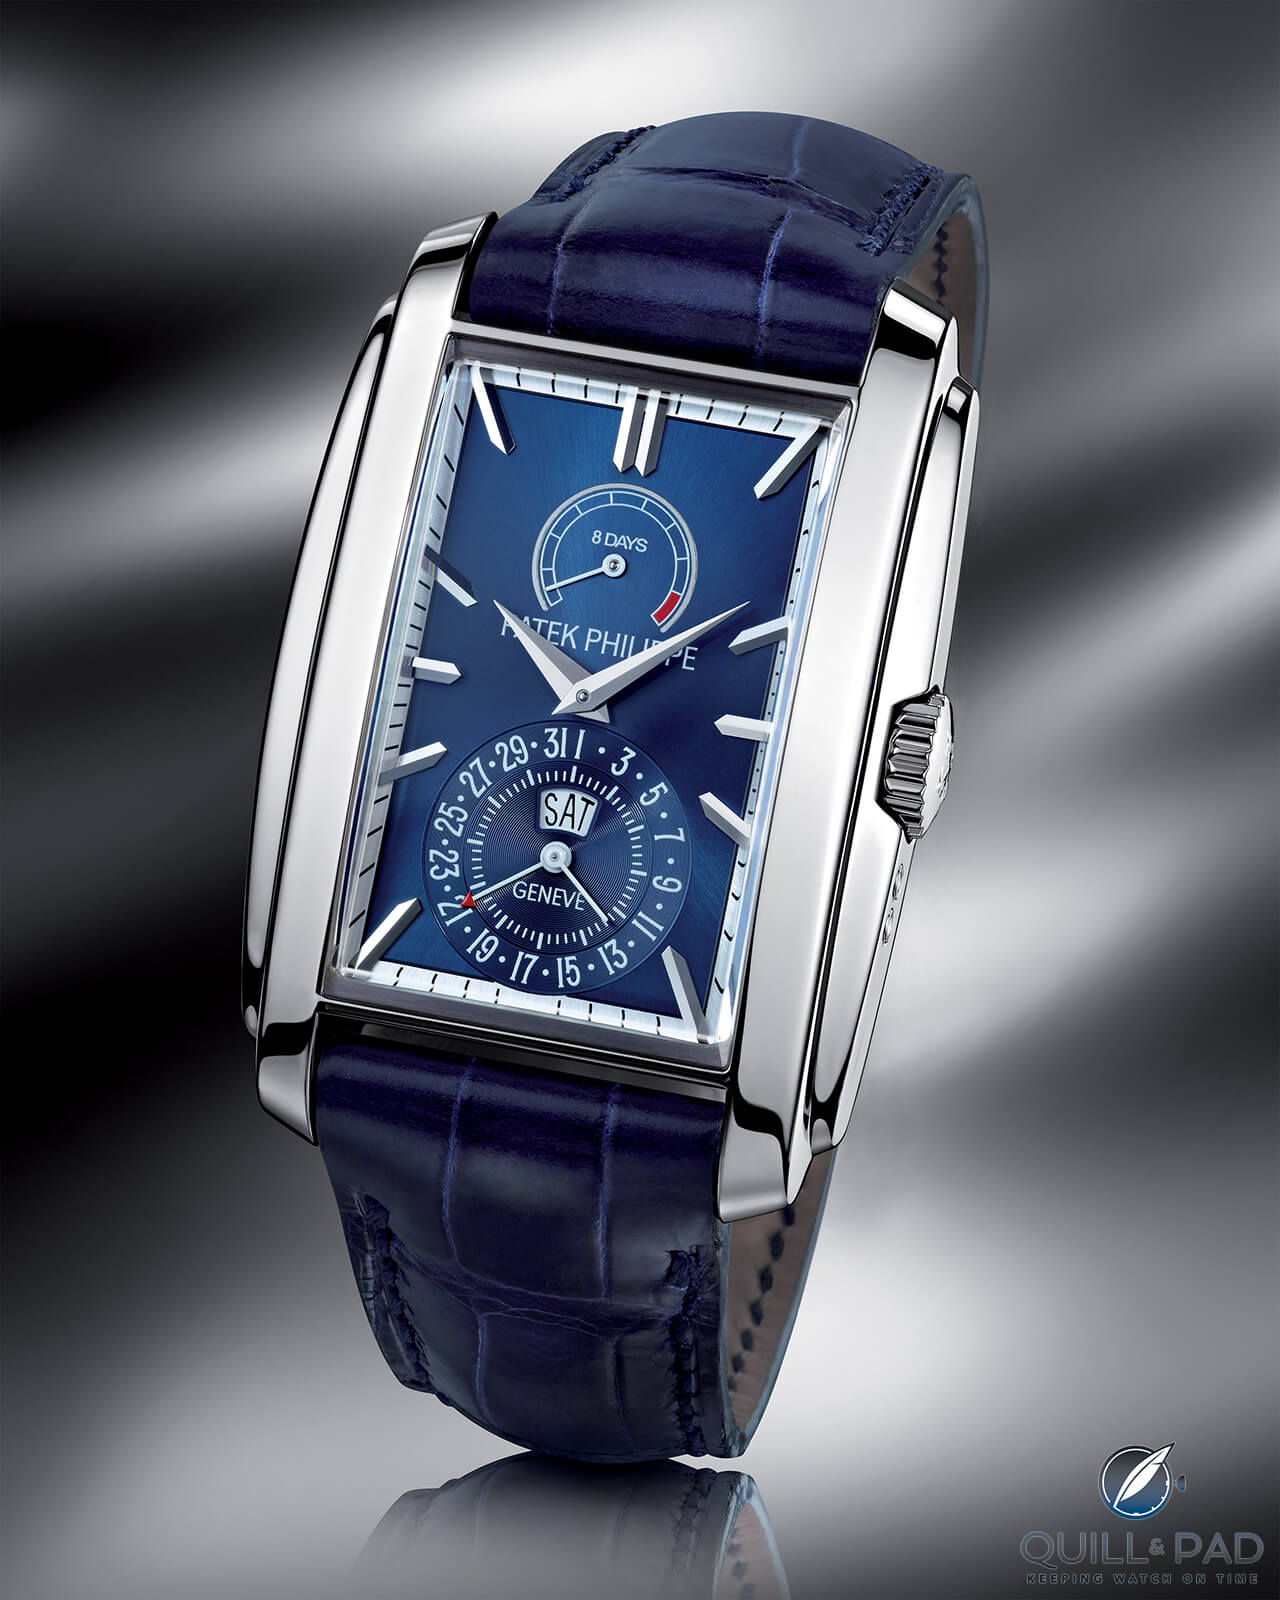 The Patek Philippe Seal - The Hour Glass Official